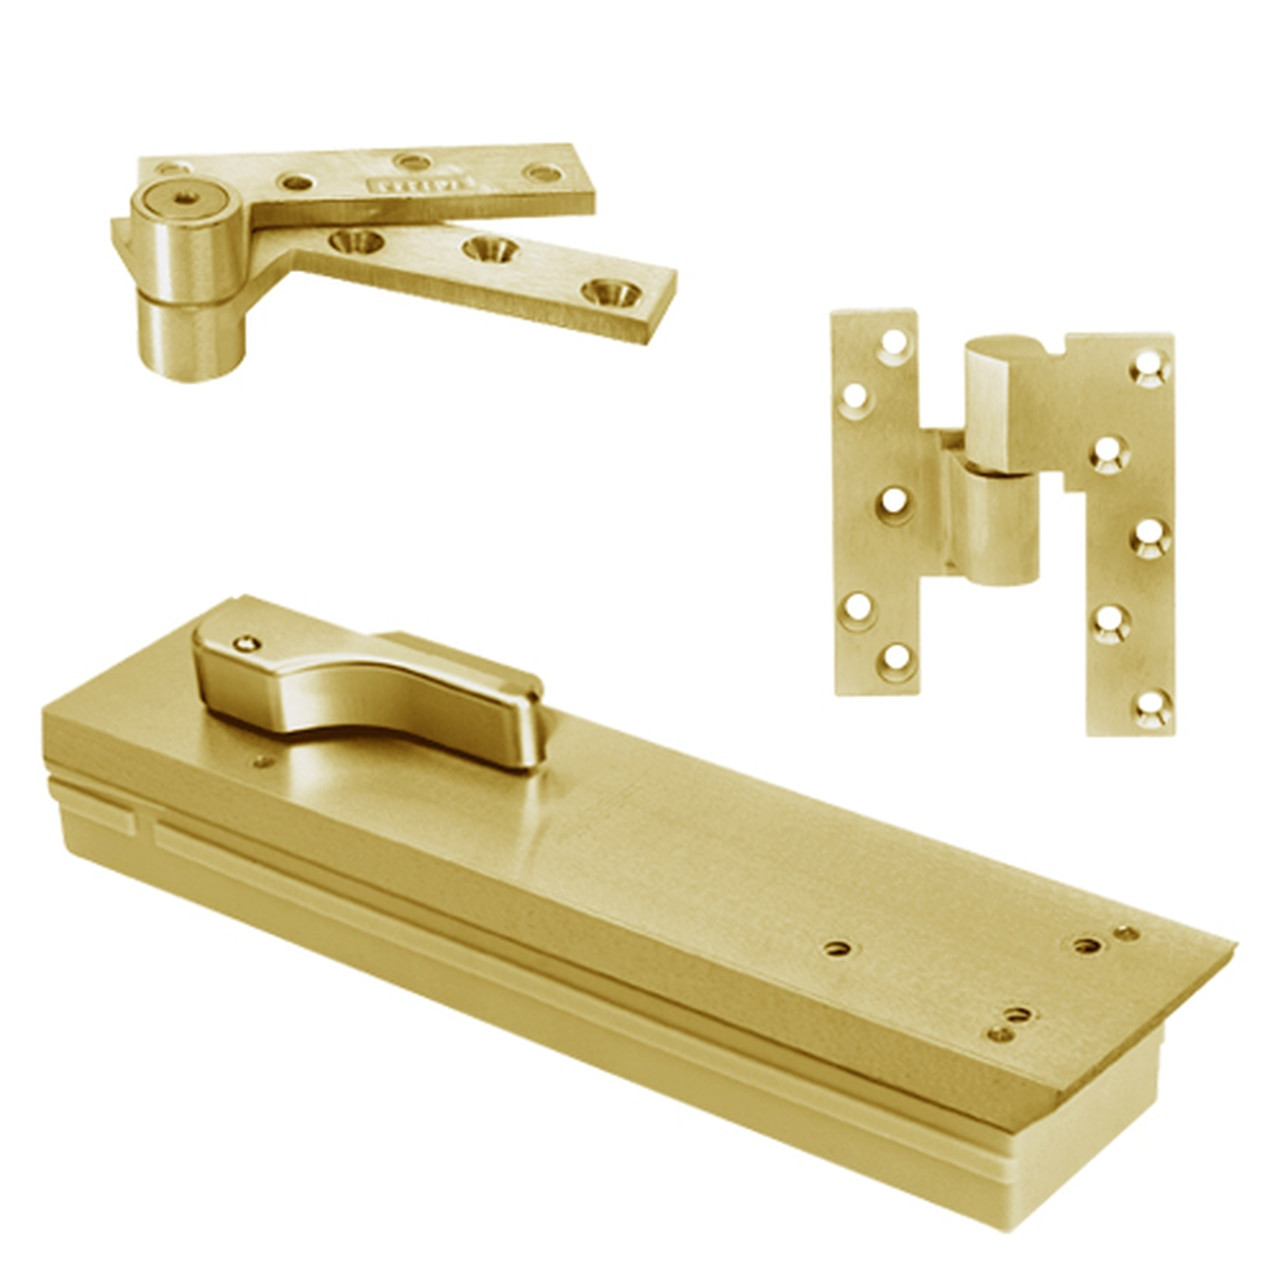 FQ5105NBC-LFP-LCC-LH-606 Rixson Q51 Series Fire Rated 3/4" Offset Hung Shallow Depth Floor Closers in Satin Brass Finish